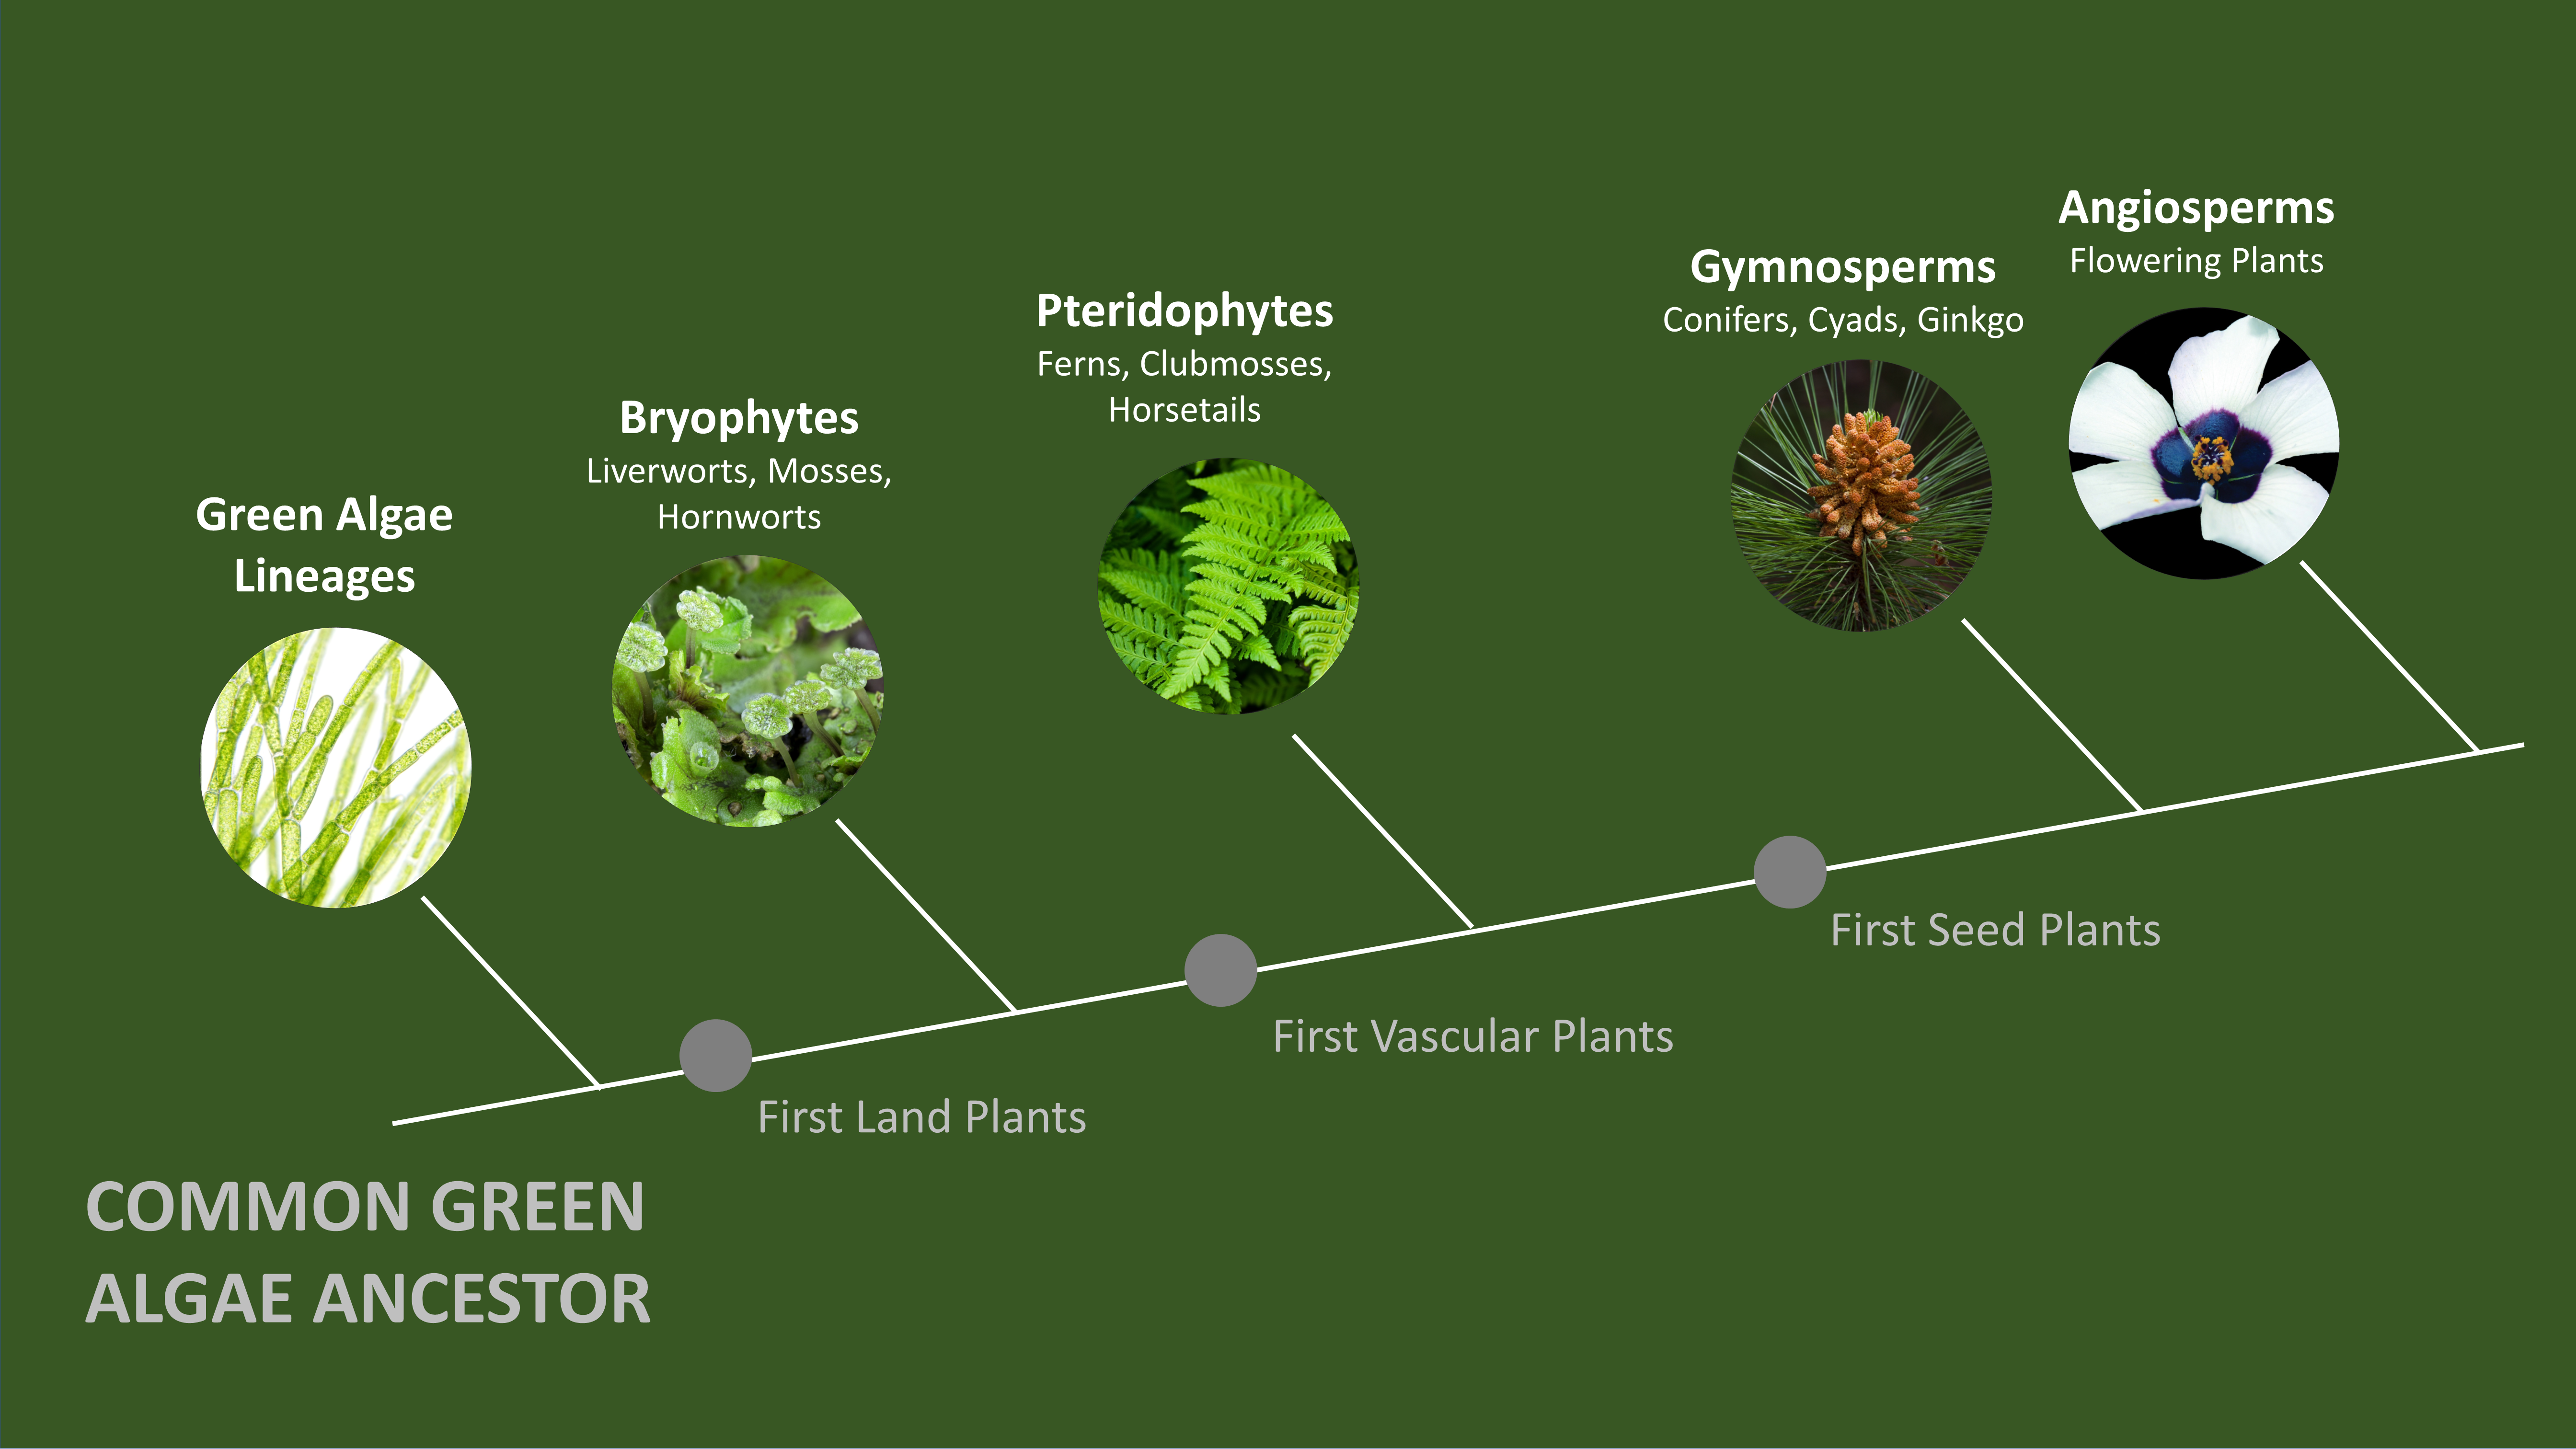 In the land plant lineage liverworts and other bryophytes separated early and followed their own evolutionary trajectory. Therefore they are only very distantly related to flowering plants such as tobacco and food crops.